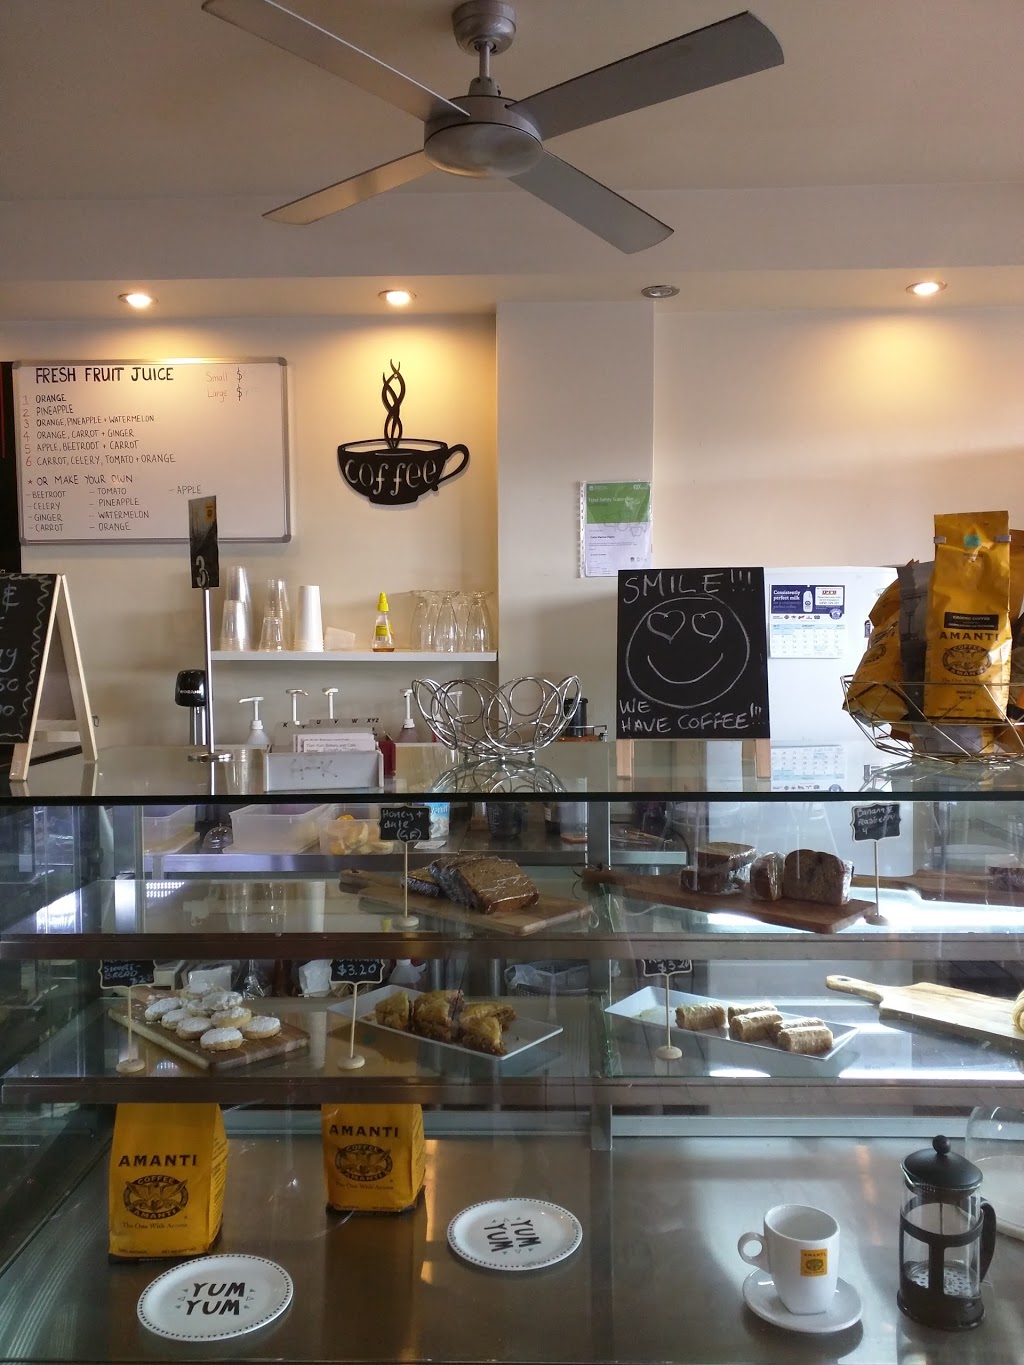 Yum Yum Bakery & Cafe | bakery | 451 Crown St, Wollongong NSW 2500, Australia | 0242288001 OR +61 2 4228 8001